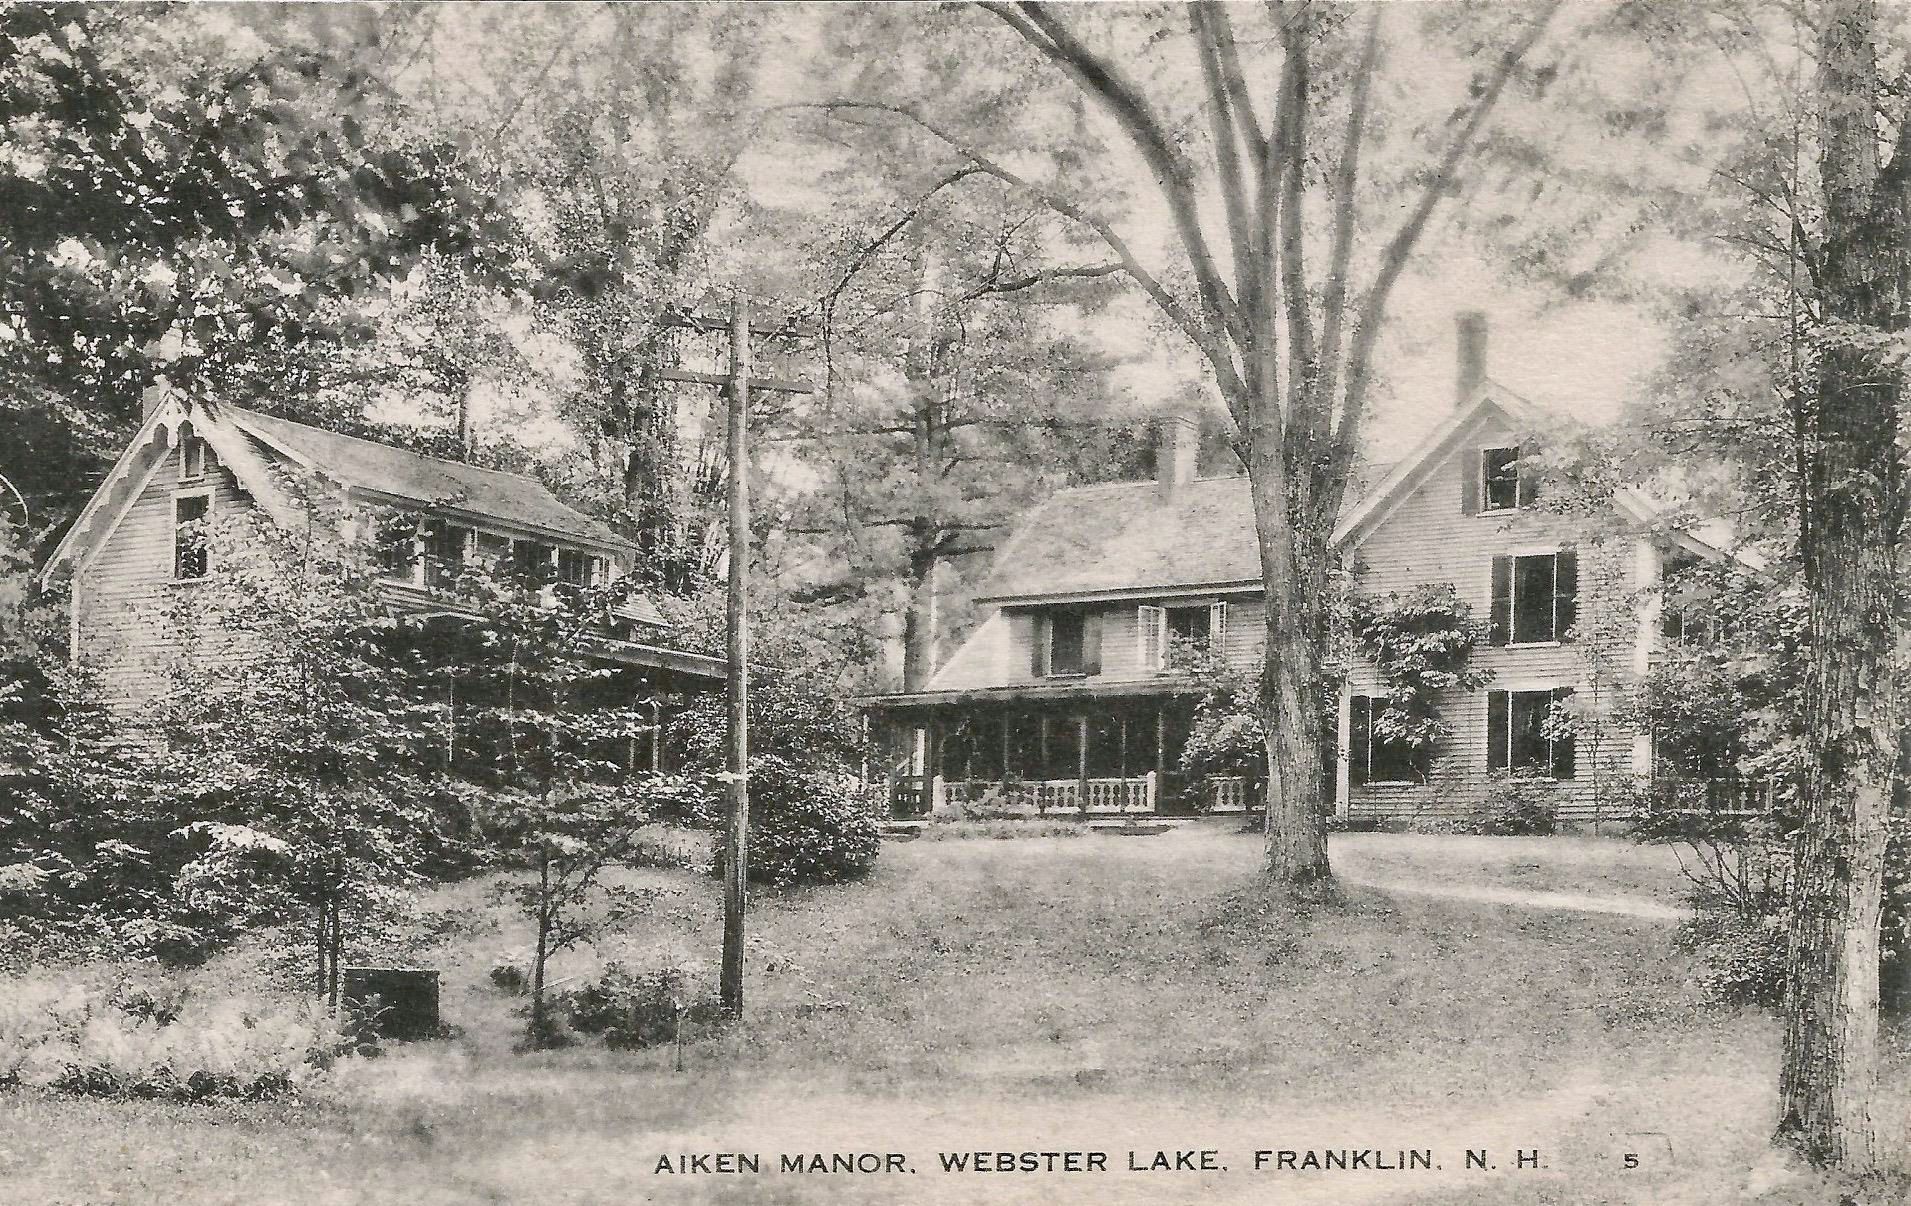 a black and white photo of the aiken manor webster lake franklin n.h.